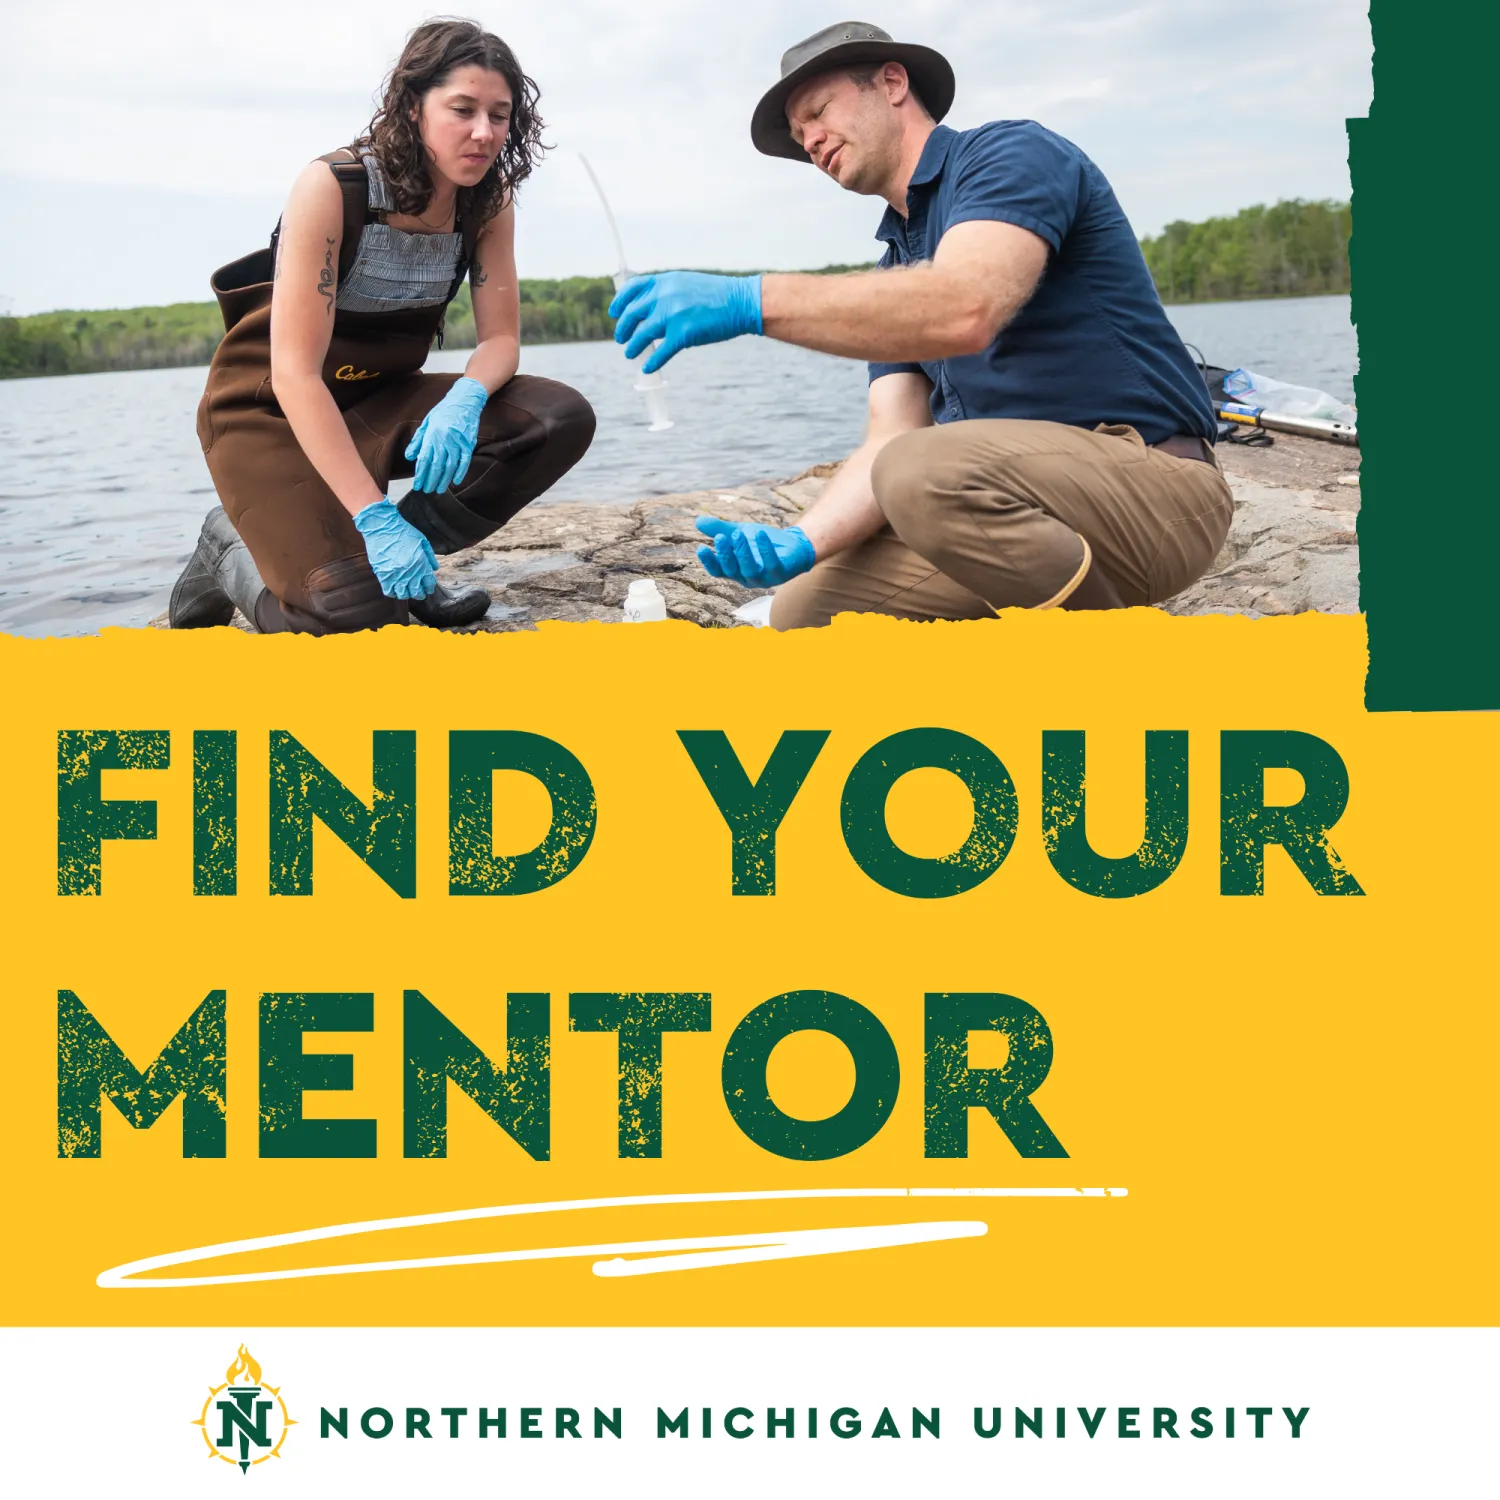 Find your mentor digital advertisement student and professor collecting water samples